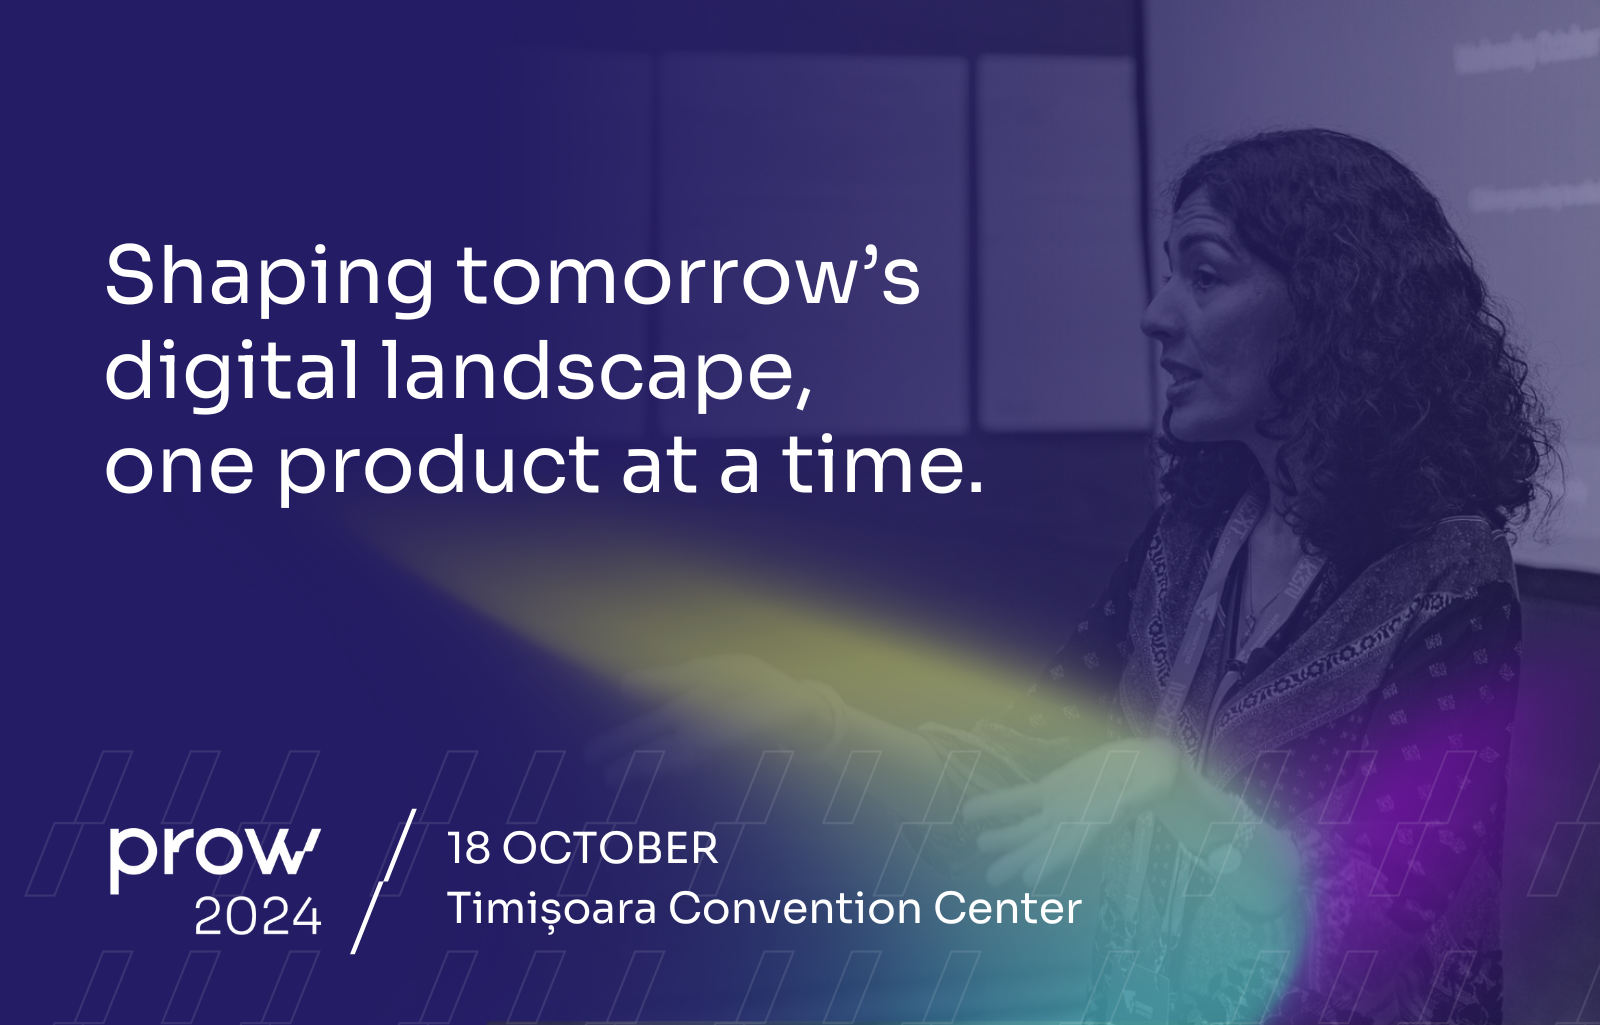 Shaping tomorrow’s digital landscape, one product at a time